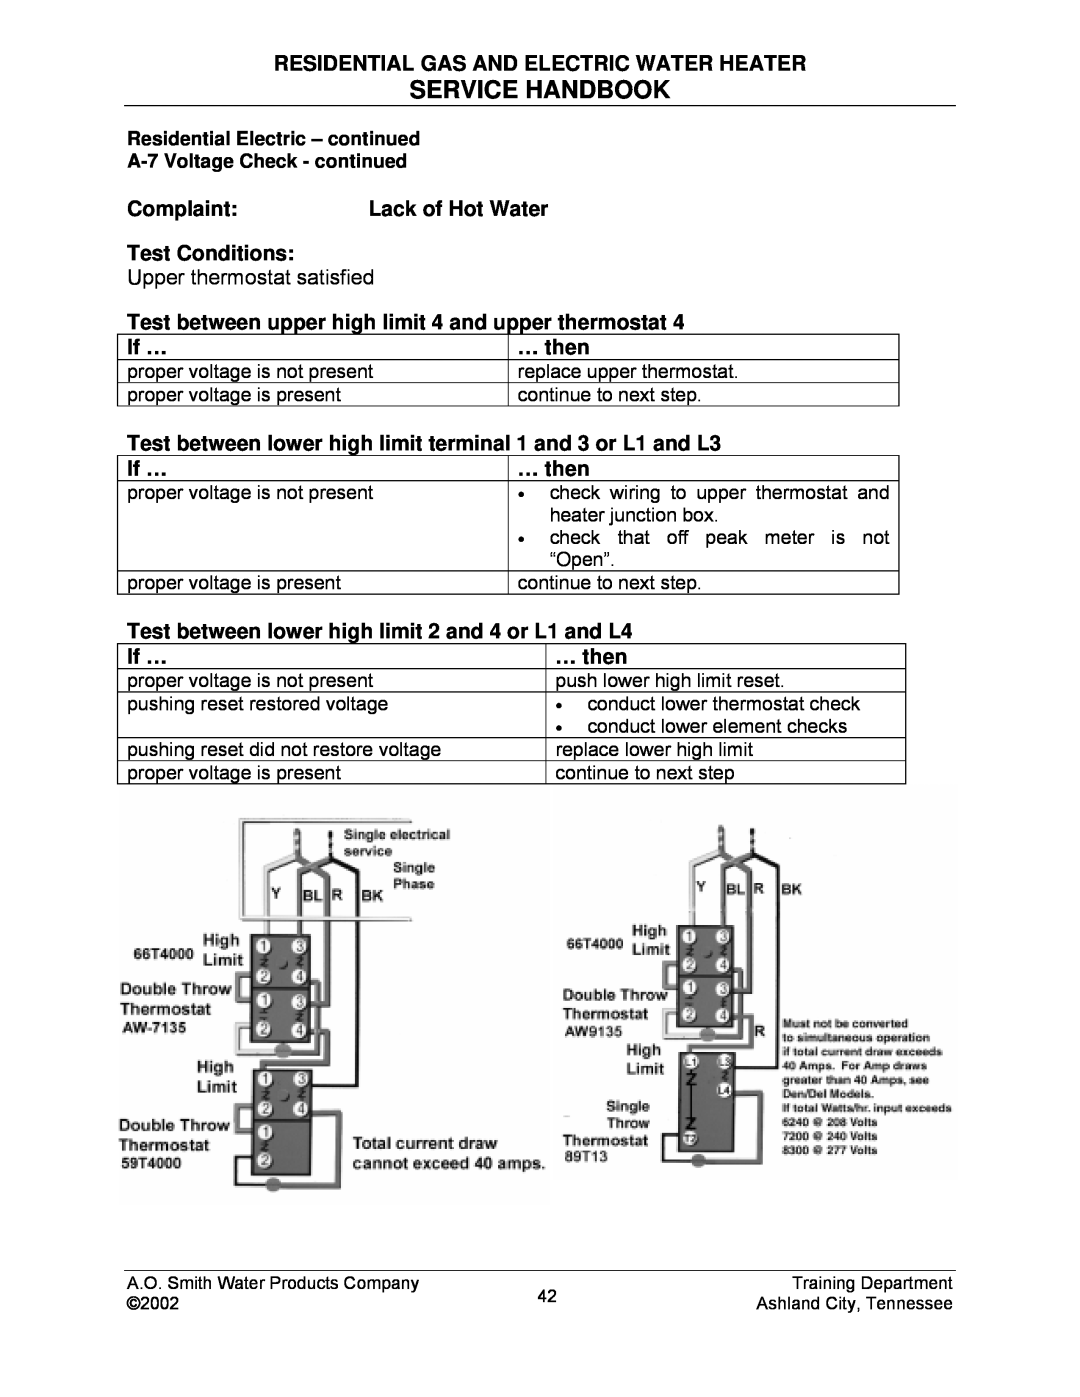 A.O. Smith TC-049-R2 manual Service Handbook, Residential Gas And Electric Water Heater, Complaint, Lack of Hot Water, If … 